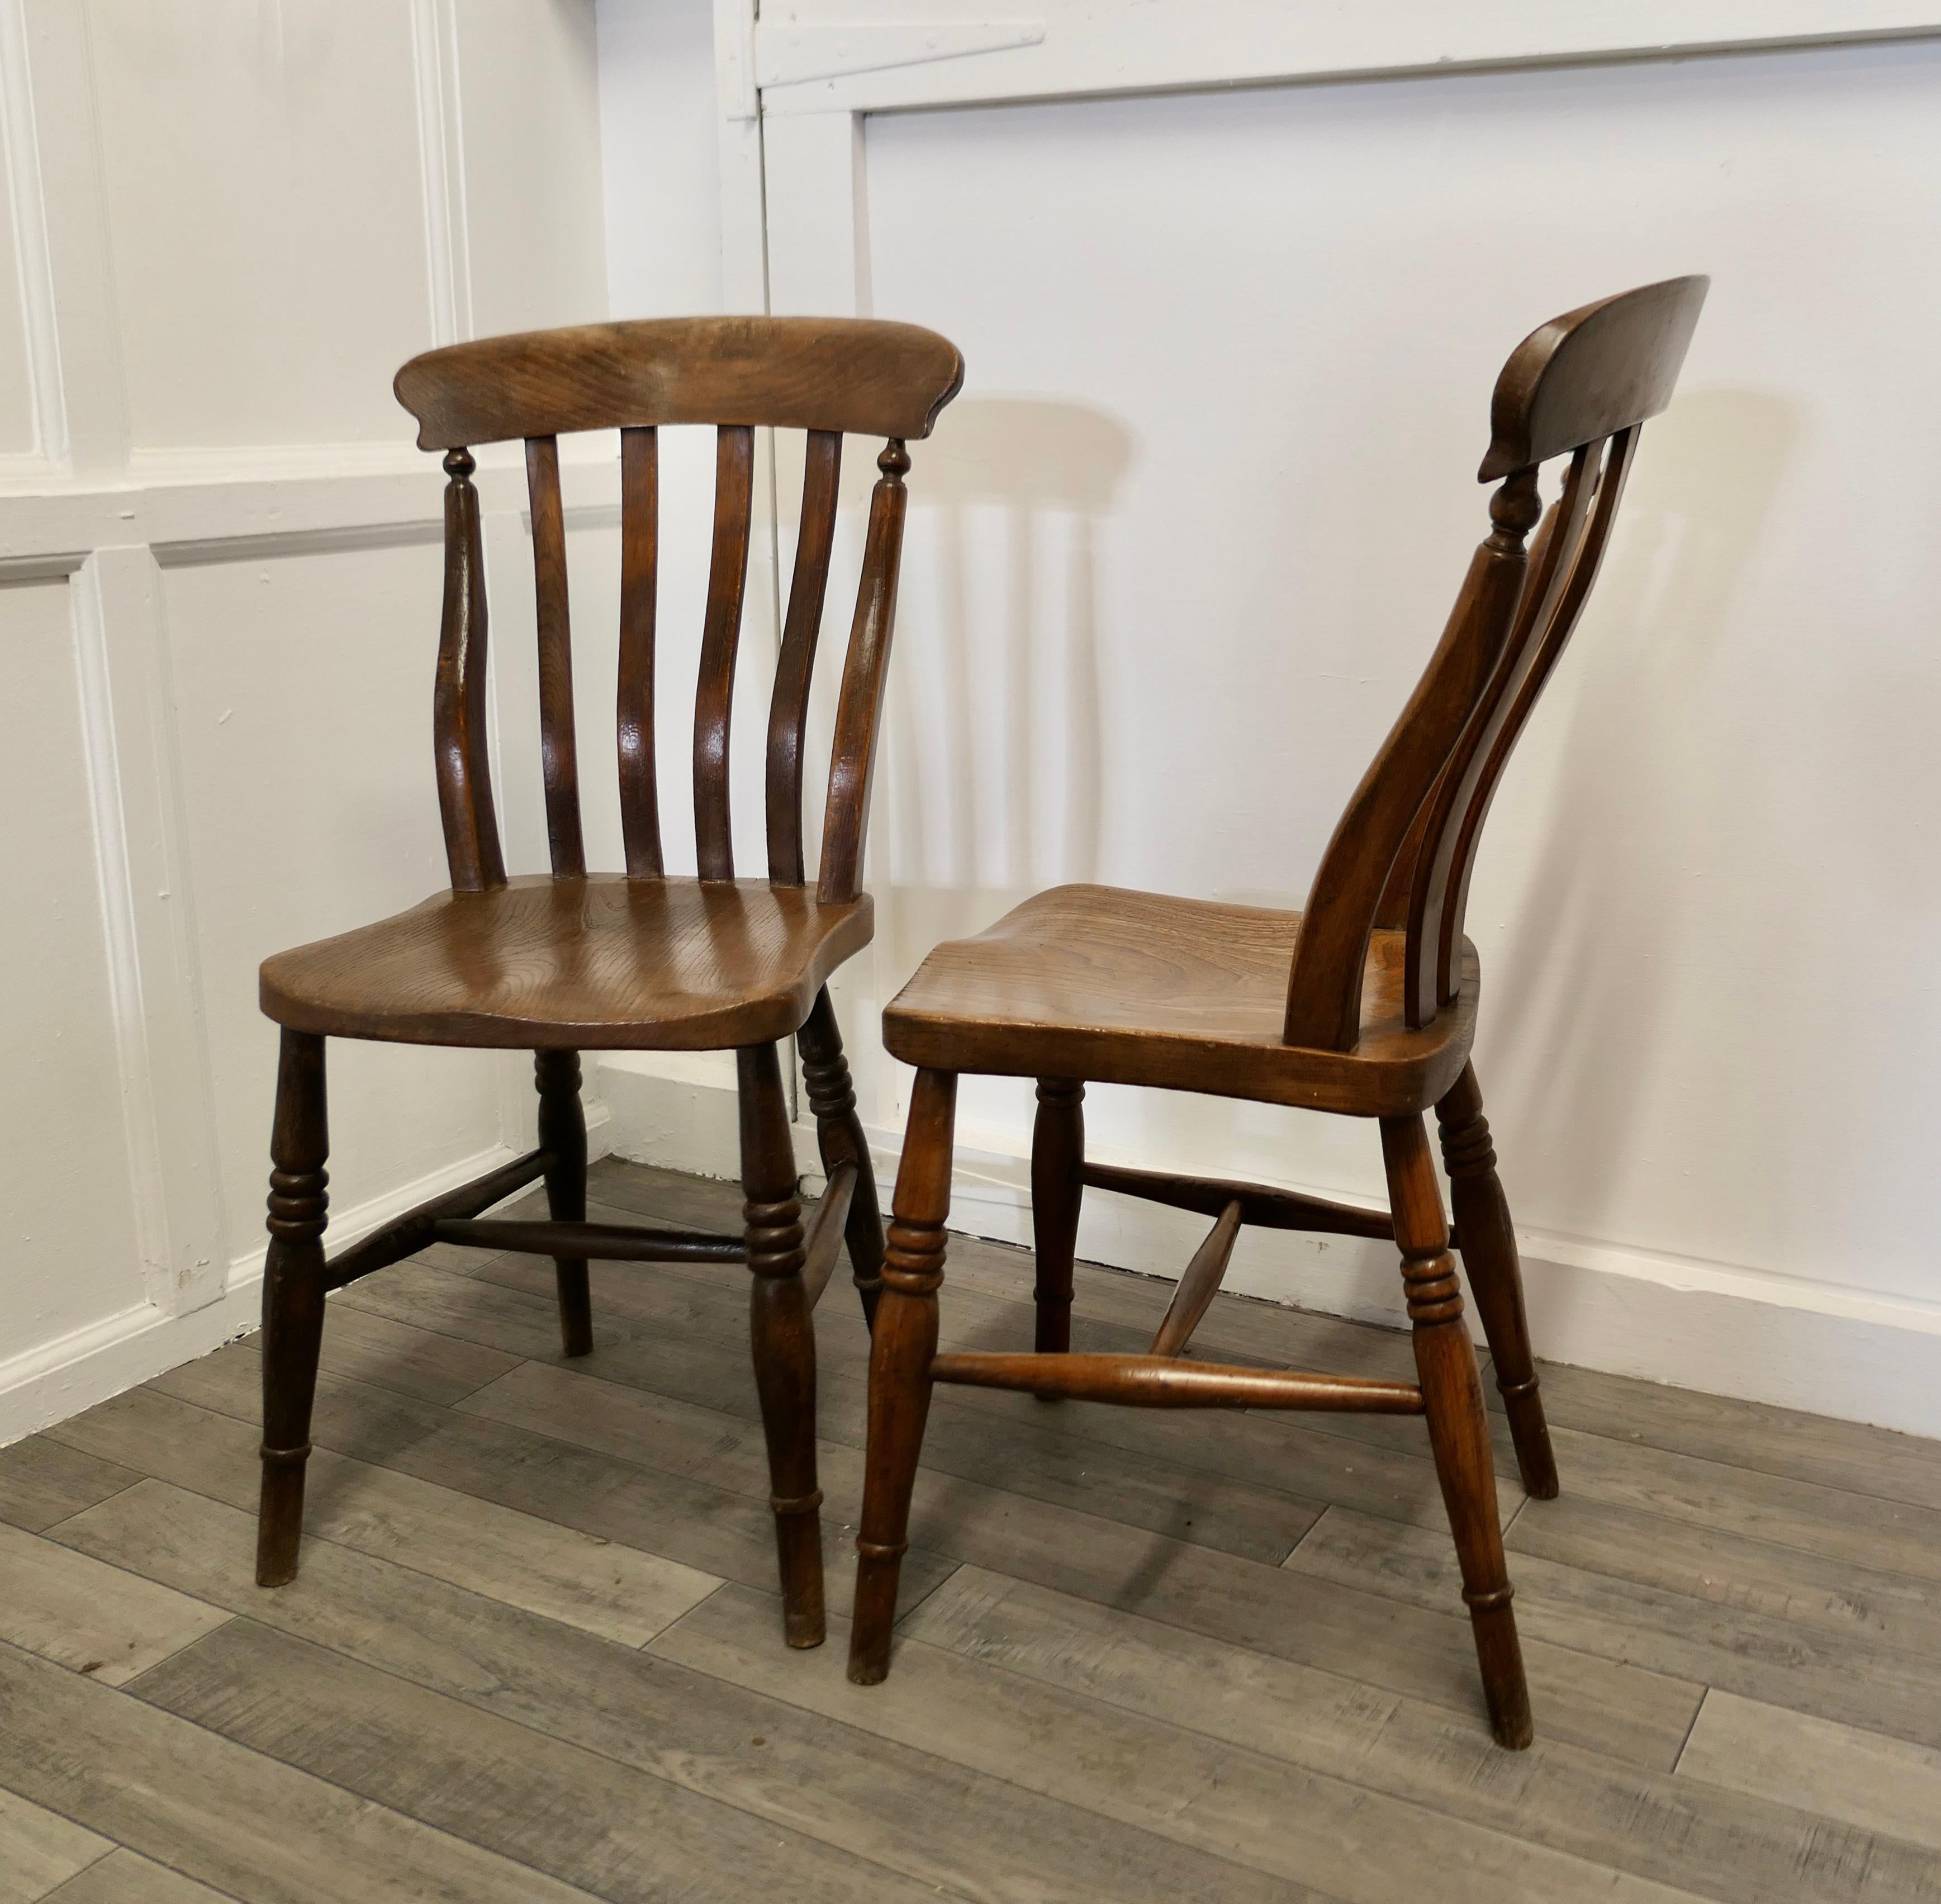 Country Pair of Victorian Slat Back Farmhouse Kitchen Chairs